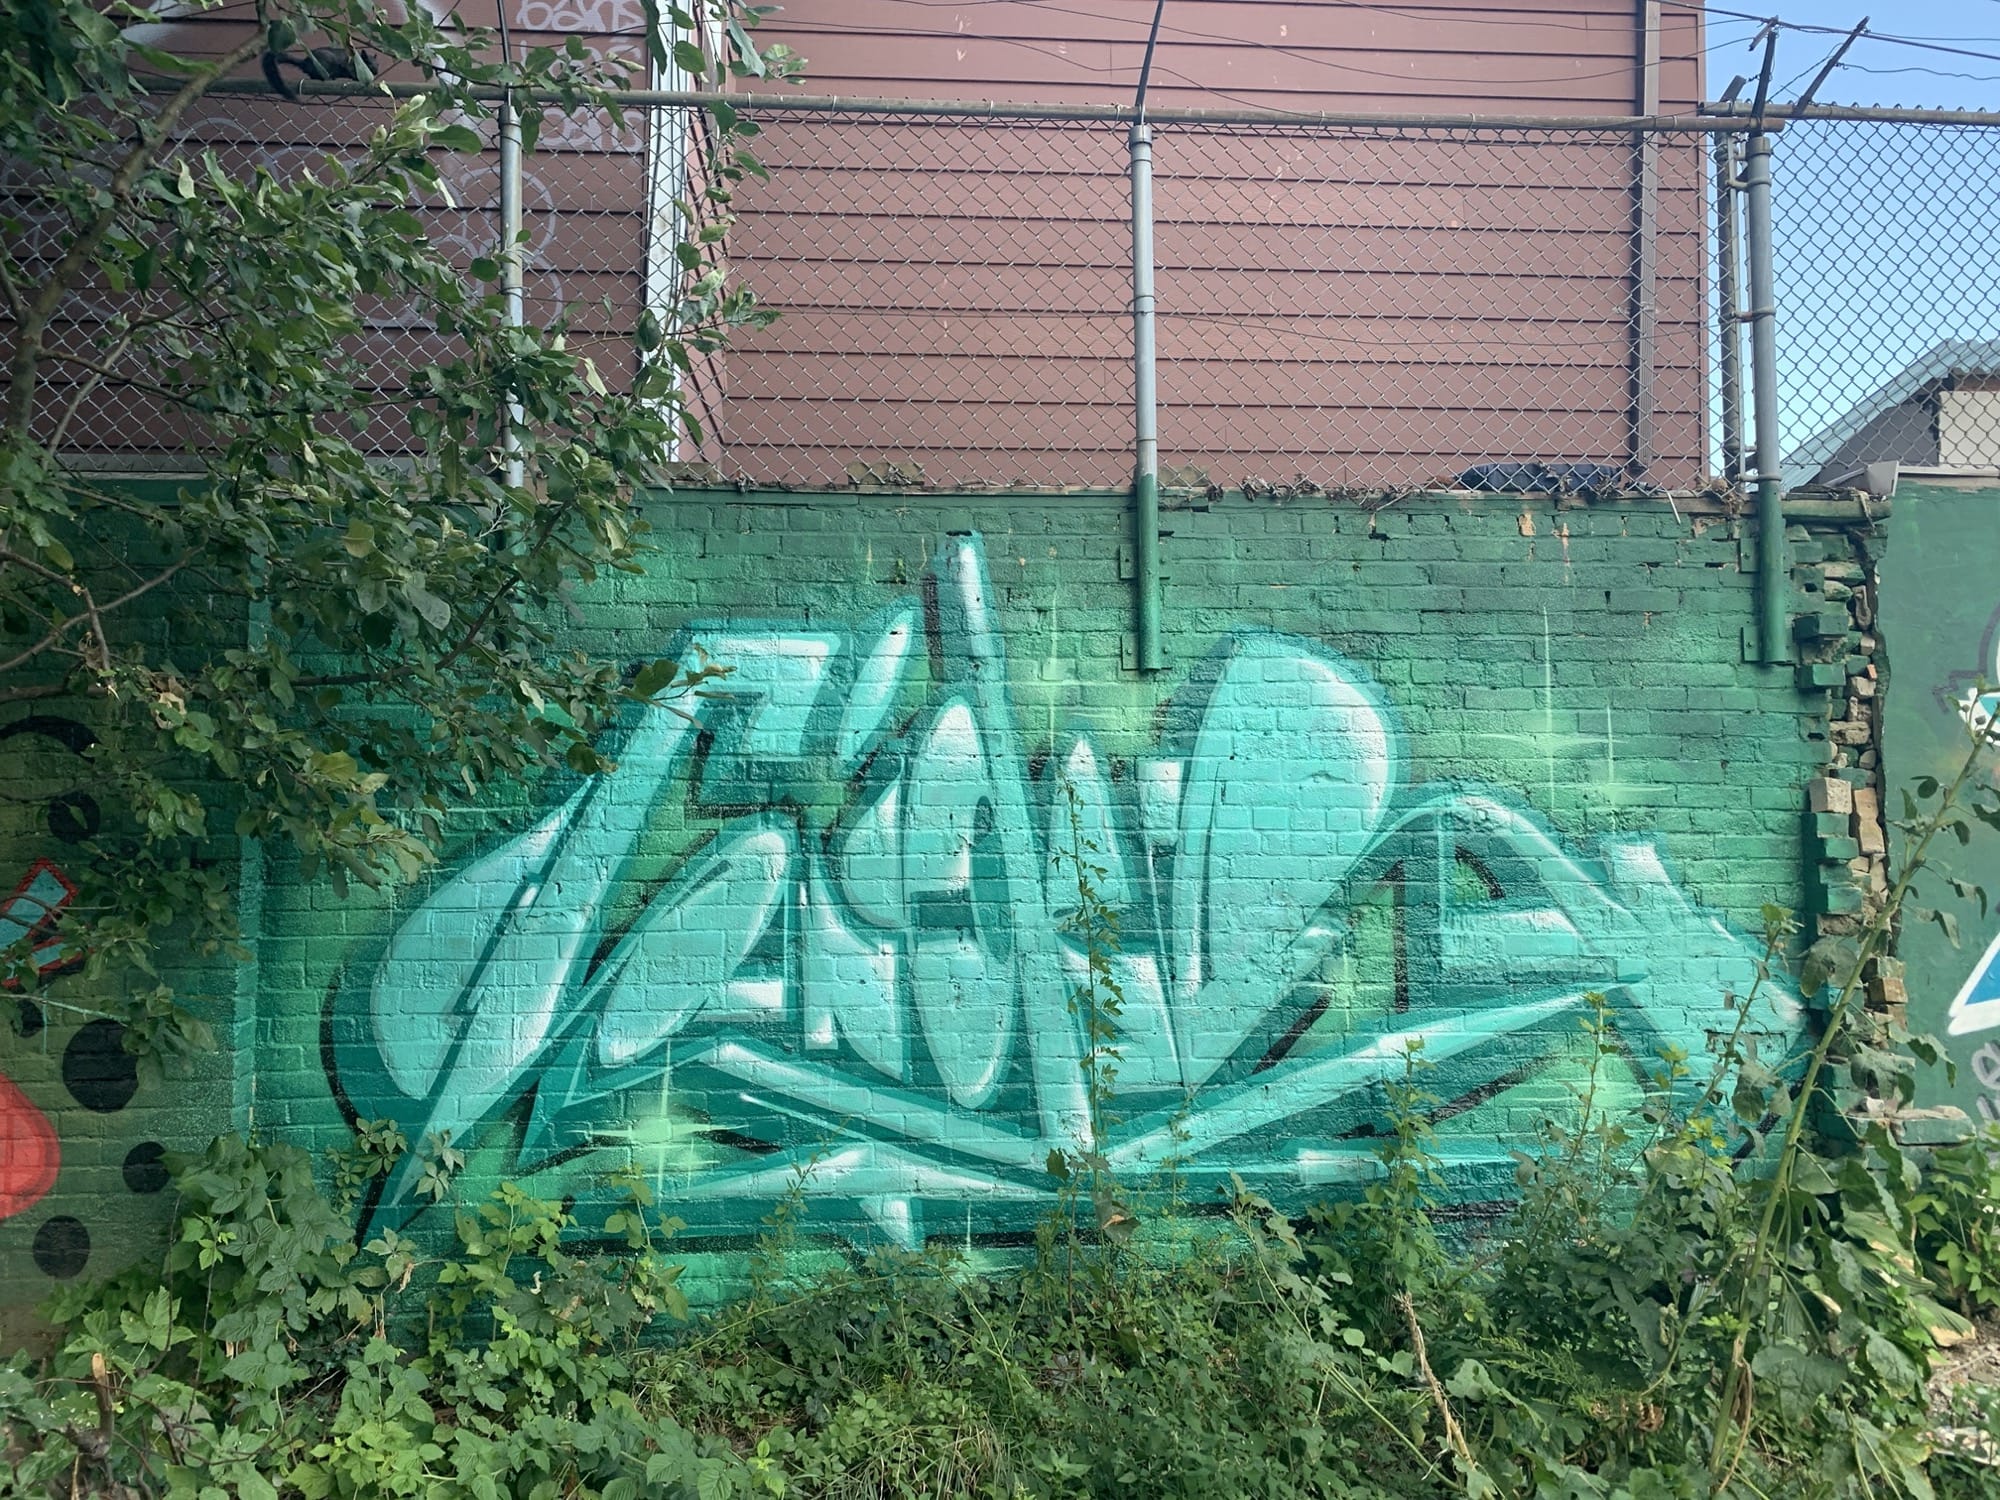 Graffiti 2452  captured by Rabot in Toronto Canada